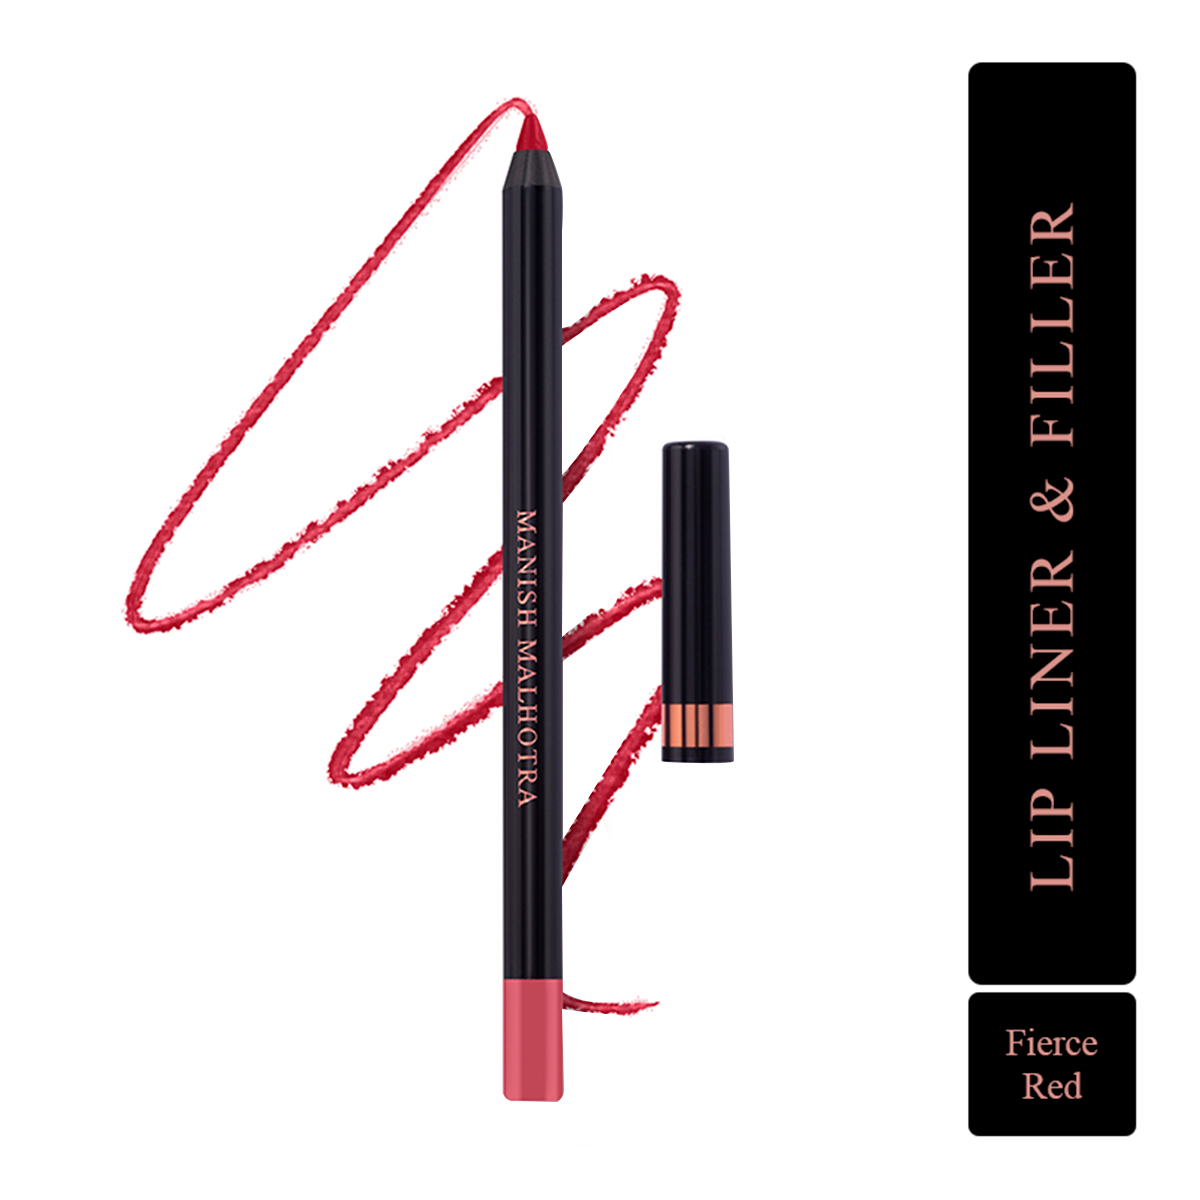 Manish Malhotra Beauty By MyGlamm Lip Liner and Filler -Fierce Red -1.2gm